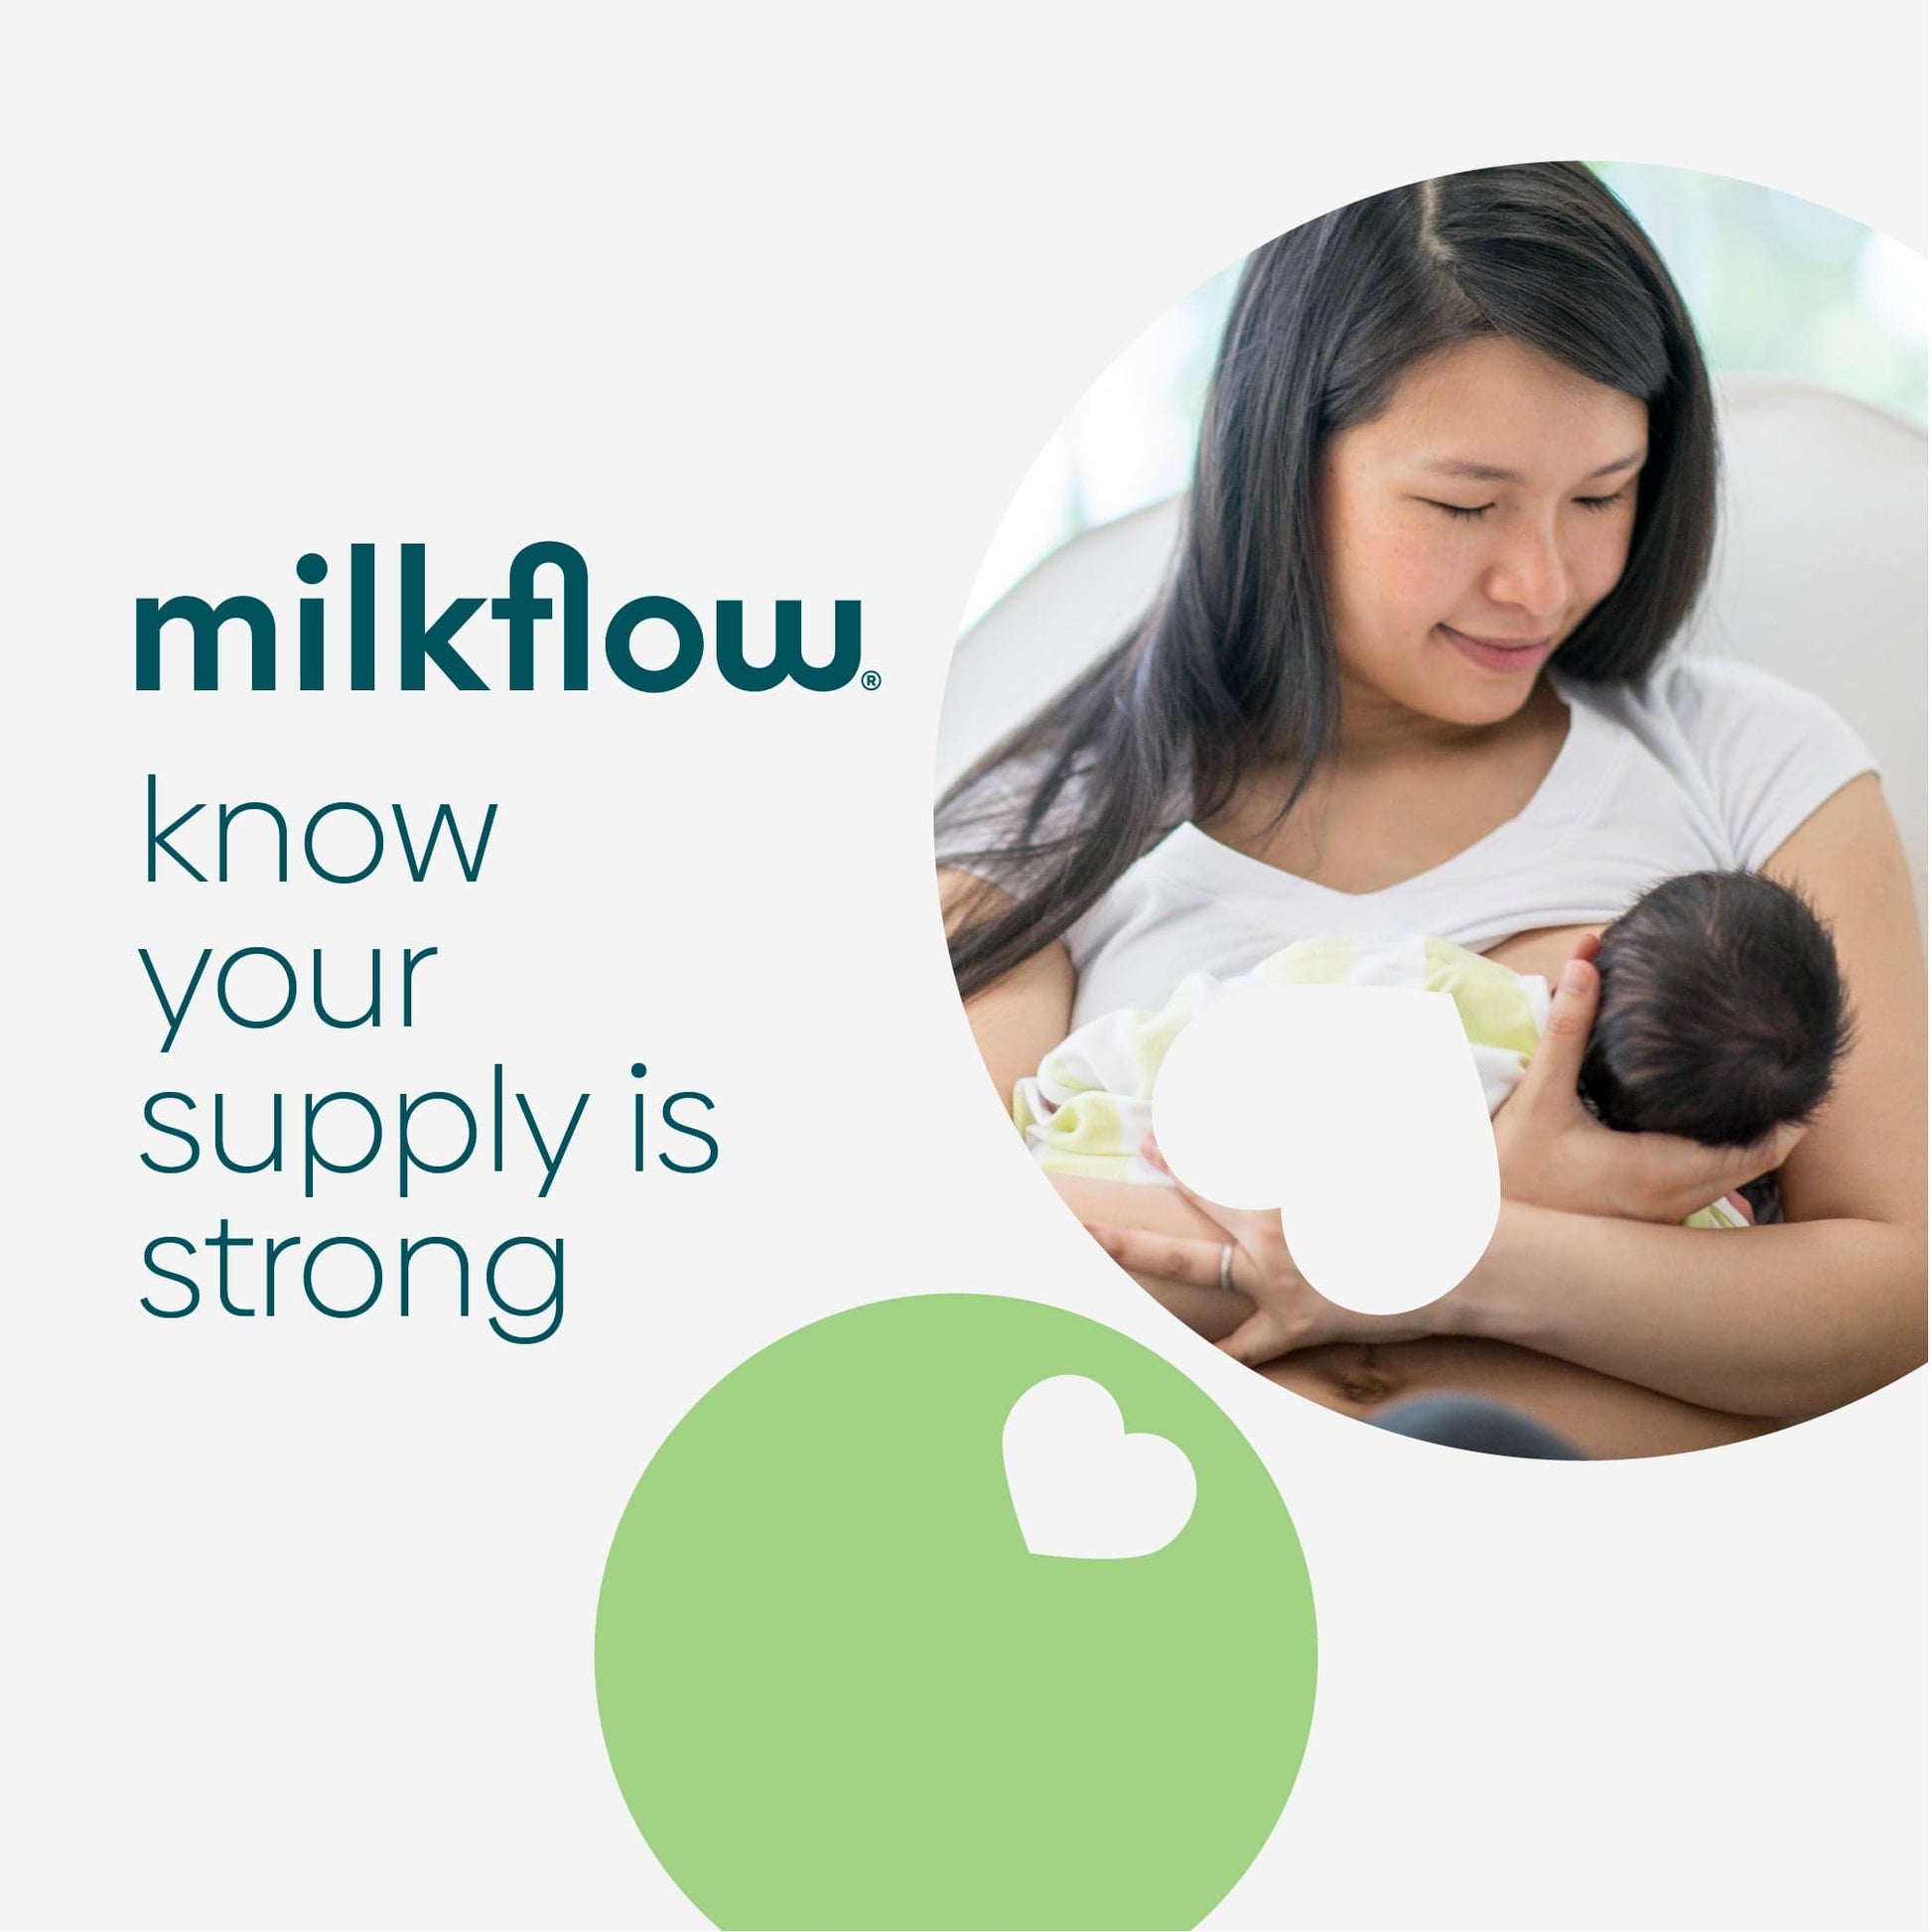 An image of a woman breastfeeding her baby thanks to MilkFlow